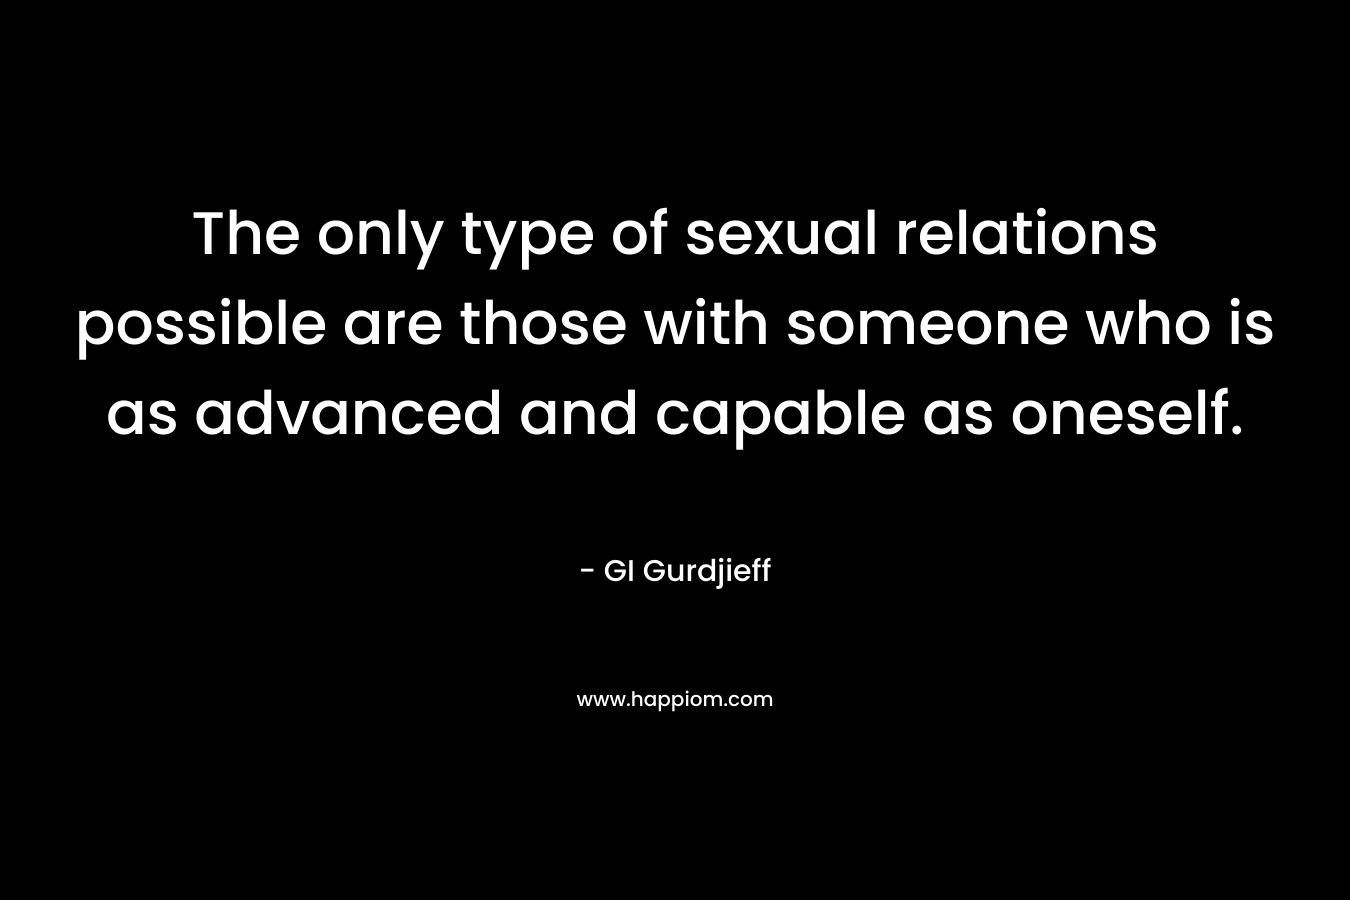 The only type of sexual relations possible are those with someone who is as advanced and capable as oneself. – GI Gurdjieff